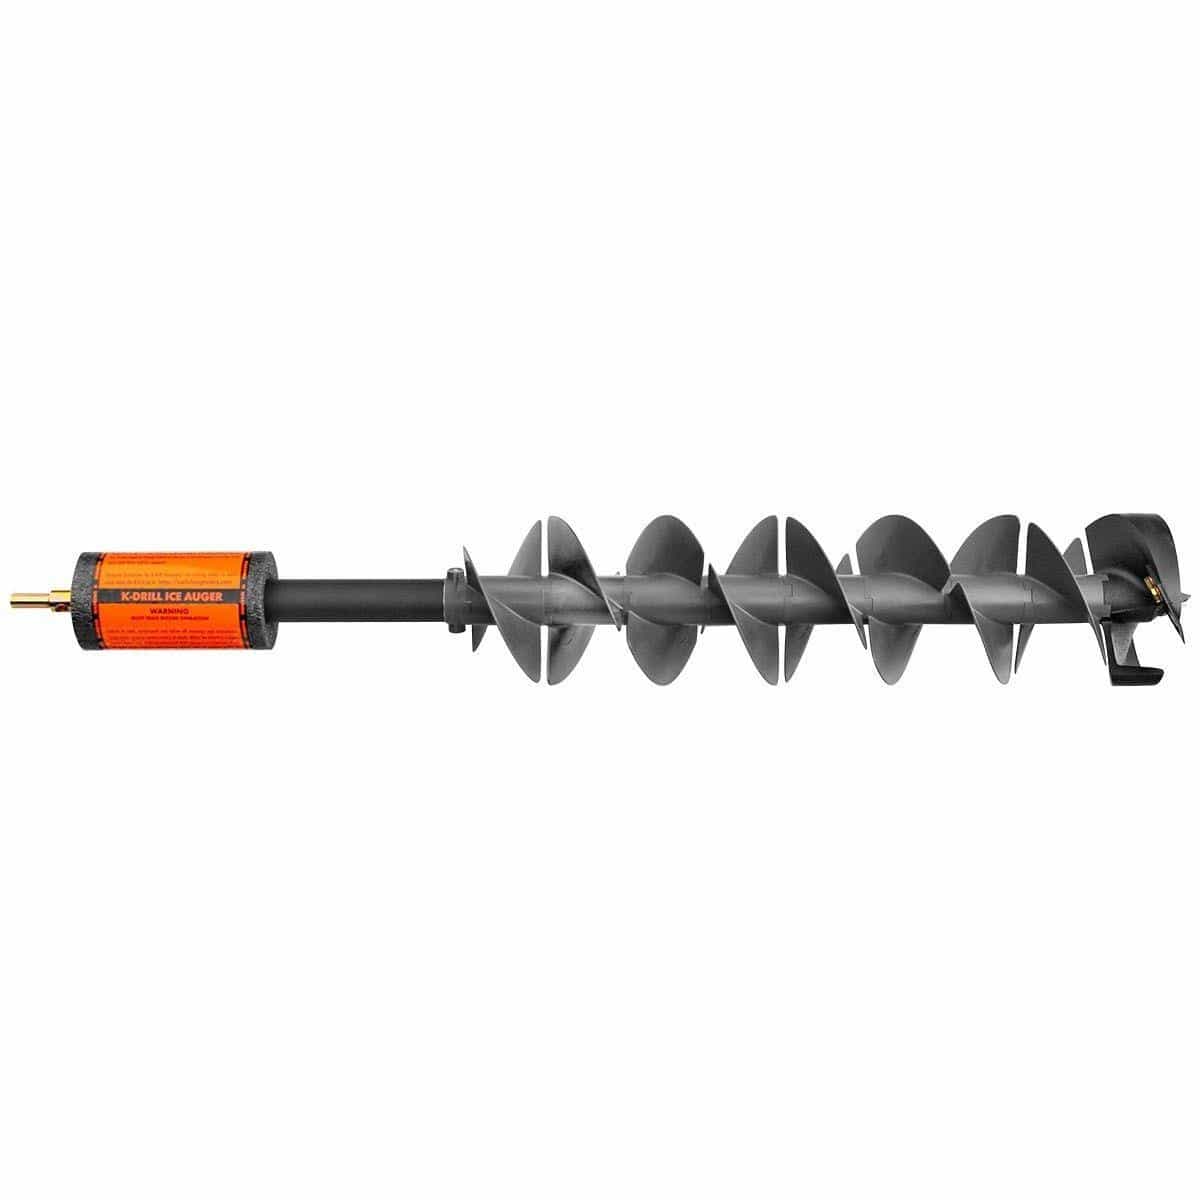 K Drill 7.5 Ice Auger